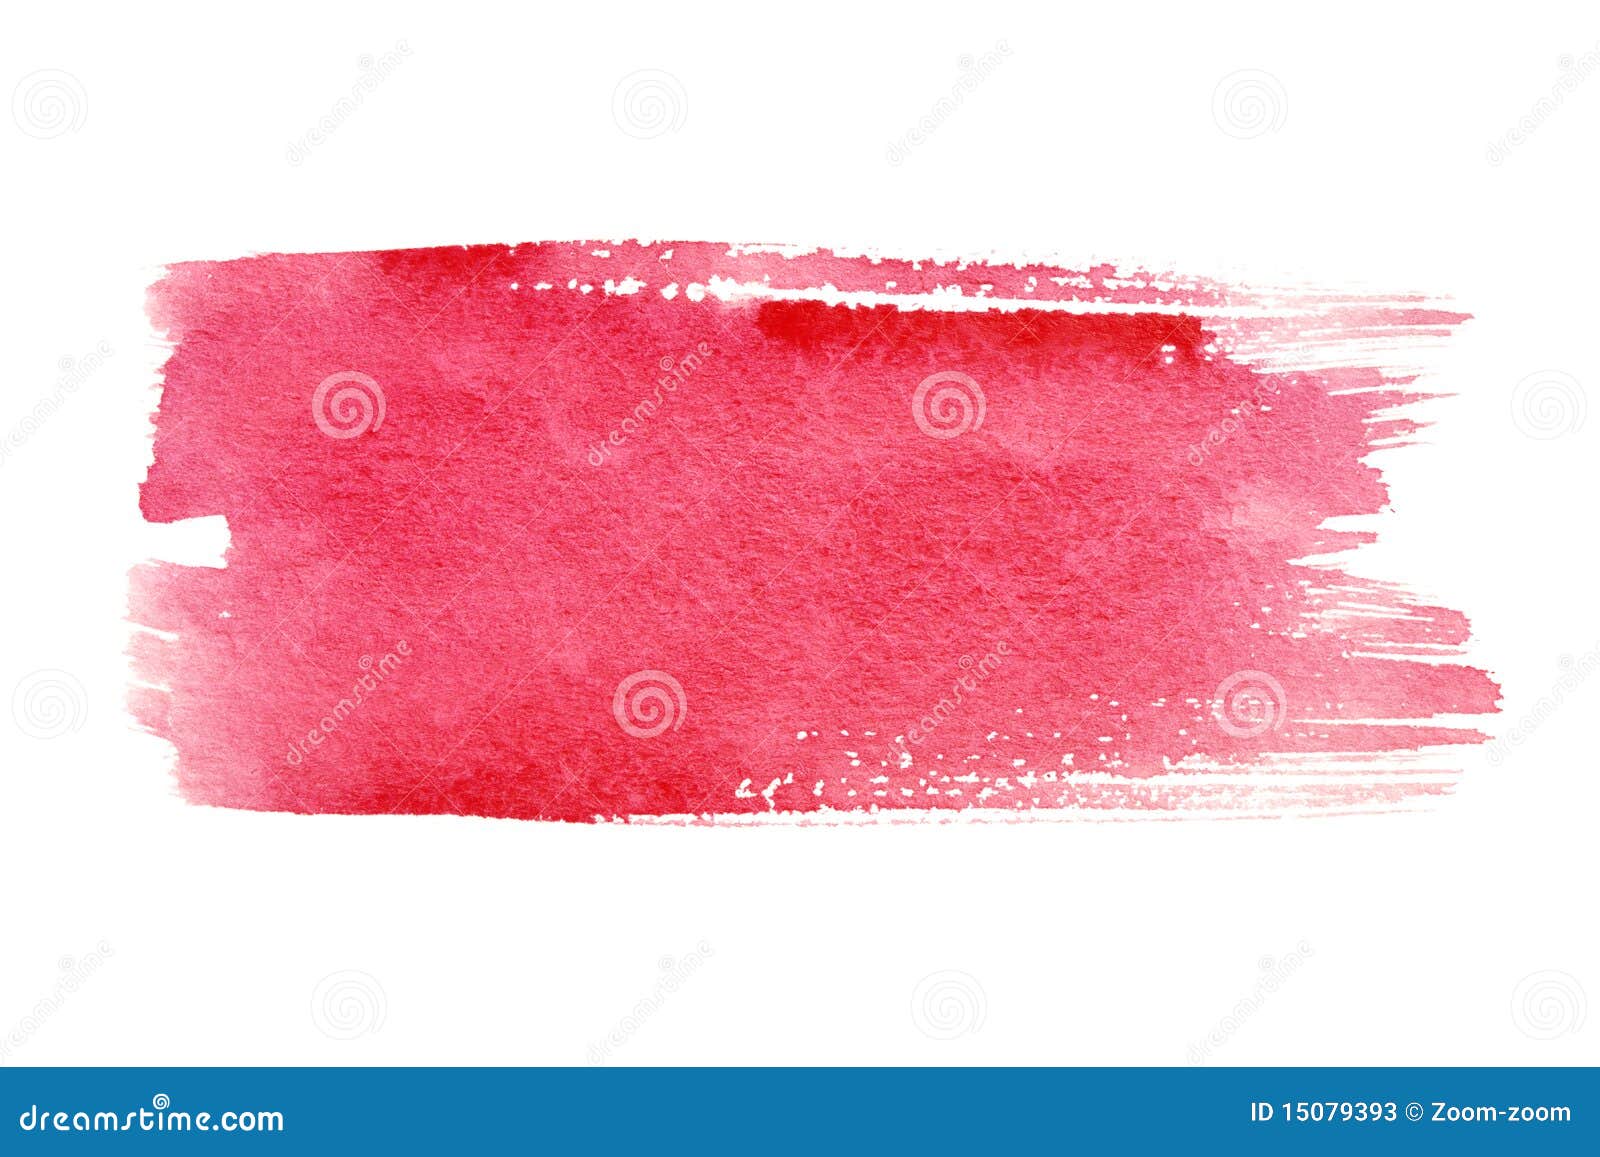 Red brush strokes stock image. Image of background, isolated - 15079393